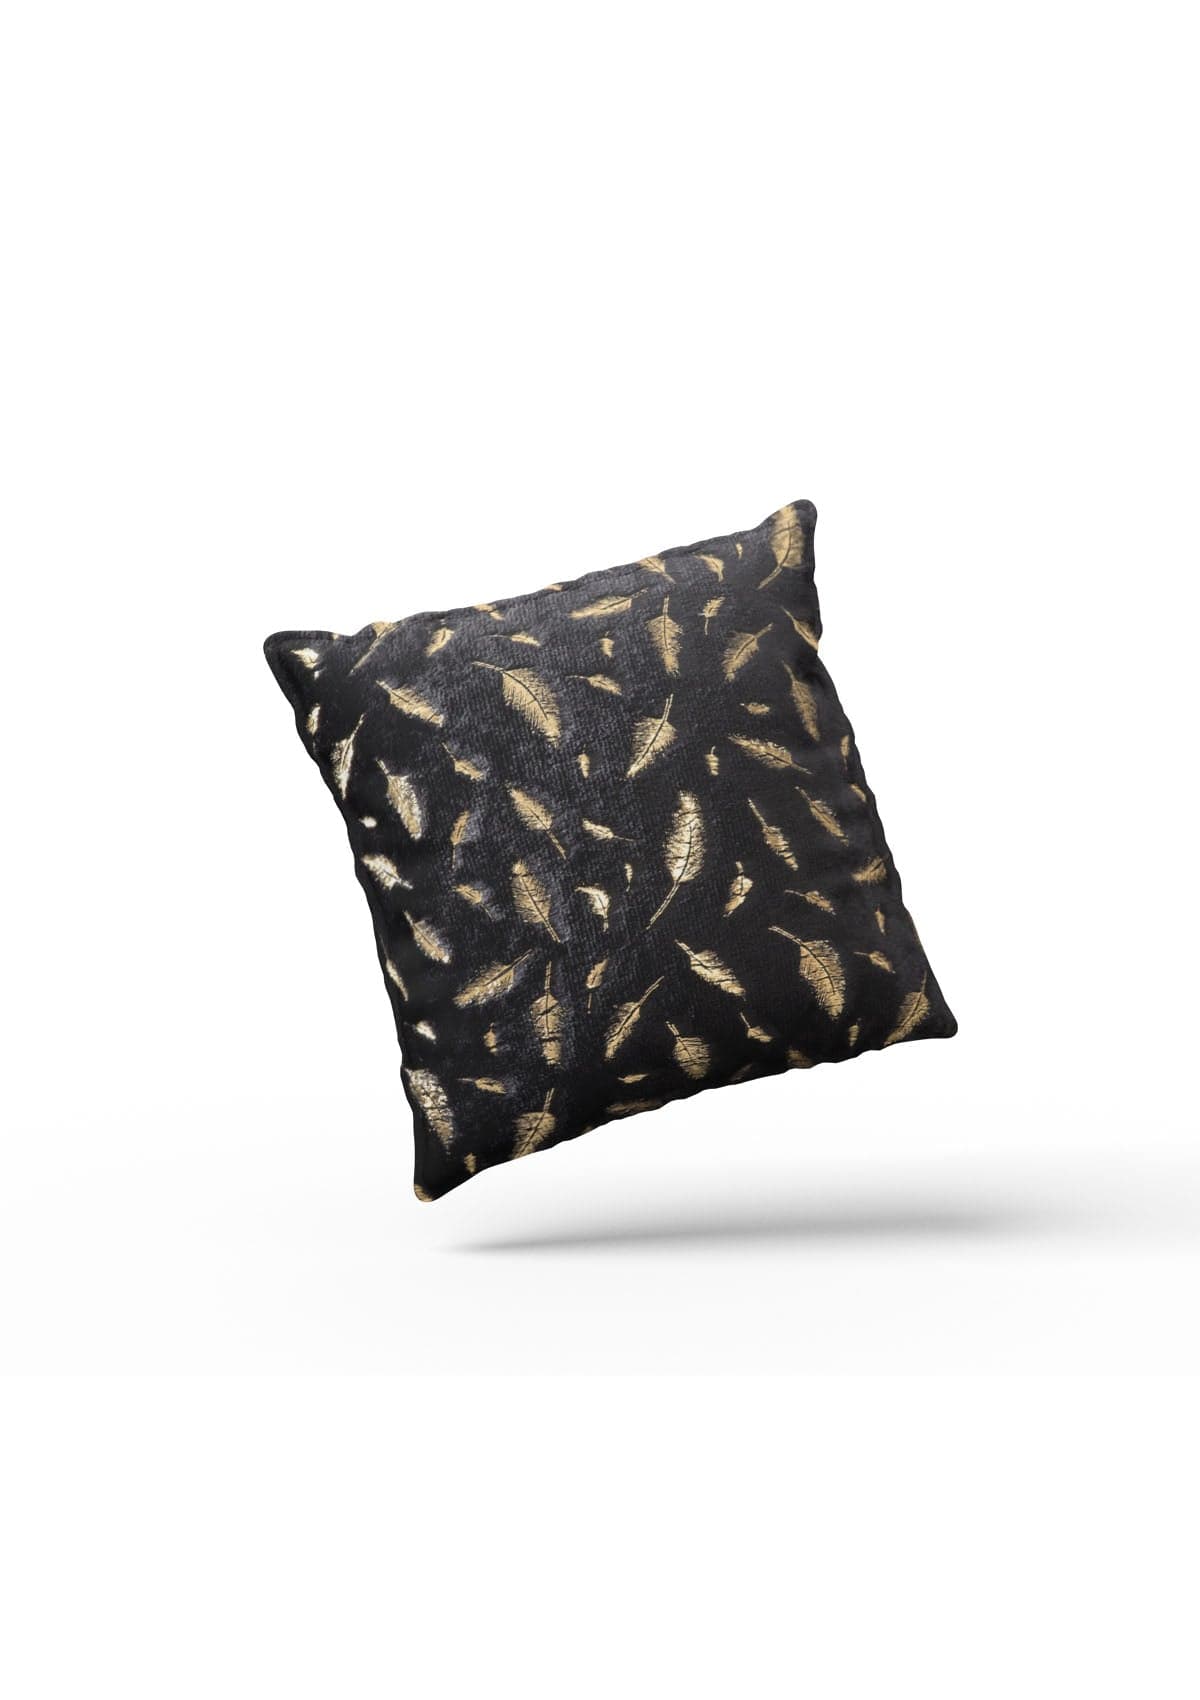 Black and Gold Cushion Covers UK | CovermyCushion